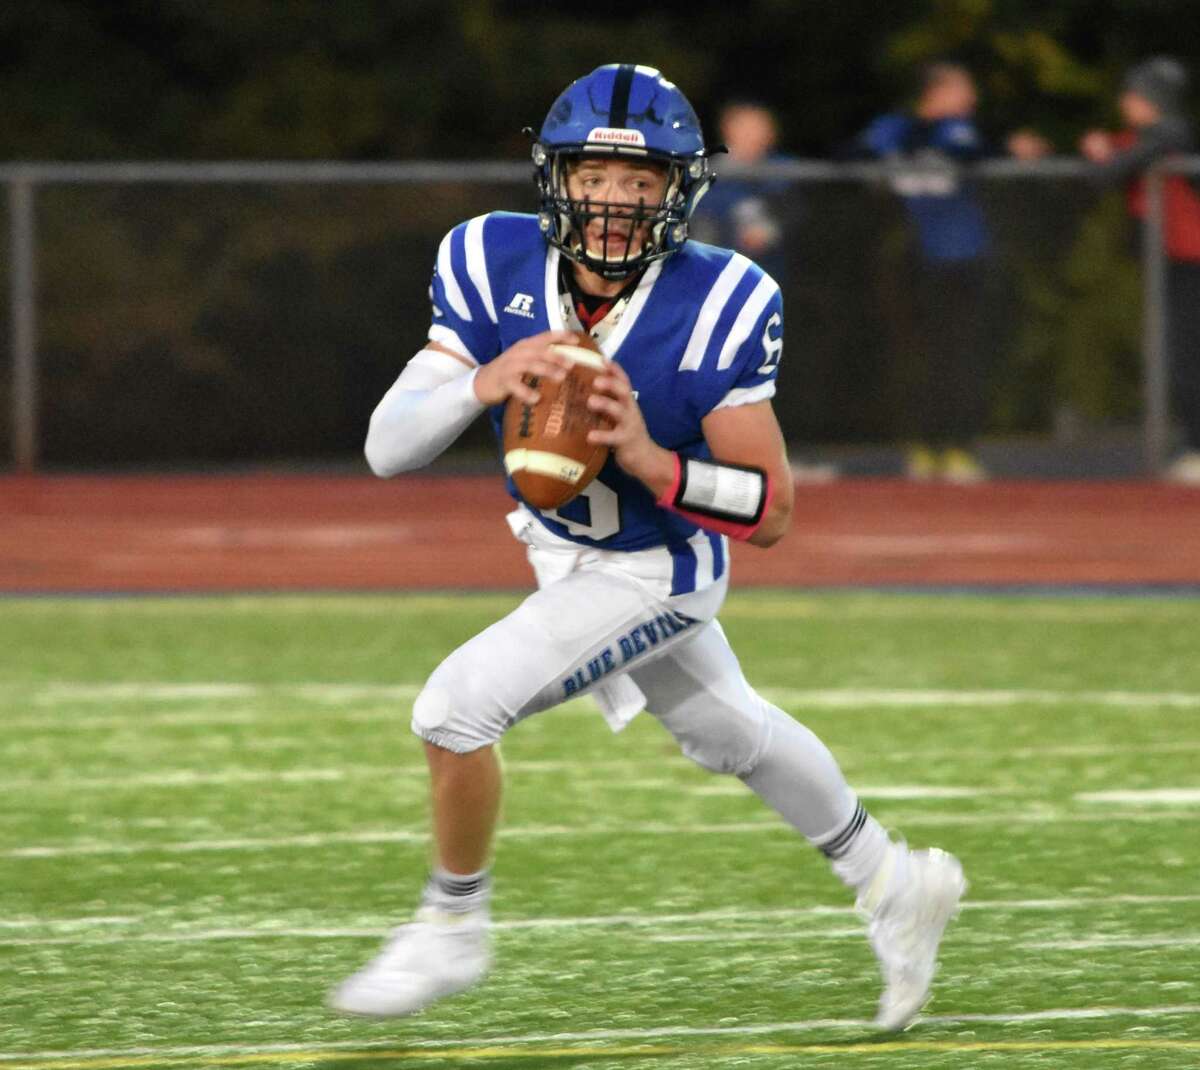 Plainville quarterback Christian Collin rolls out vs. Bloomfield at Plainville high school on Oct. 4, 2019. (Pete Paguaga, Hearst Connecticut Media)